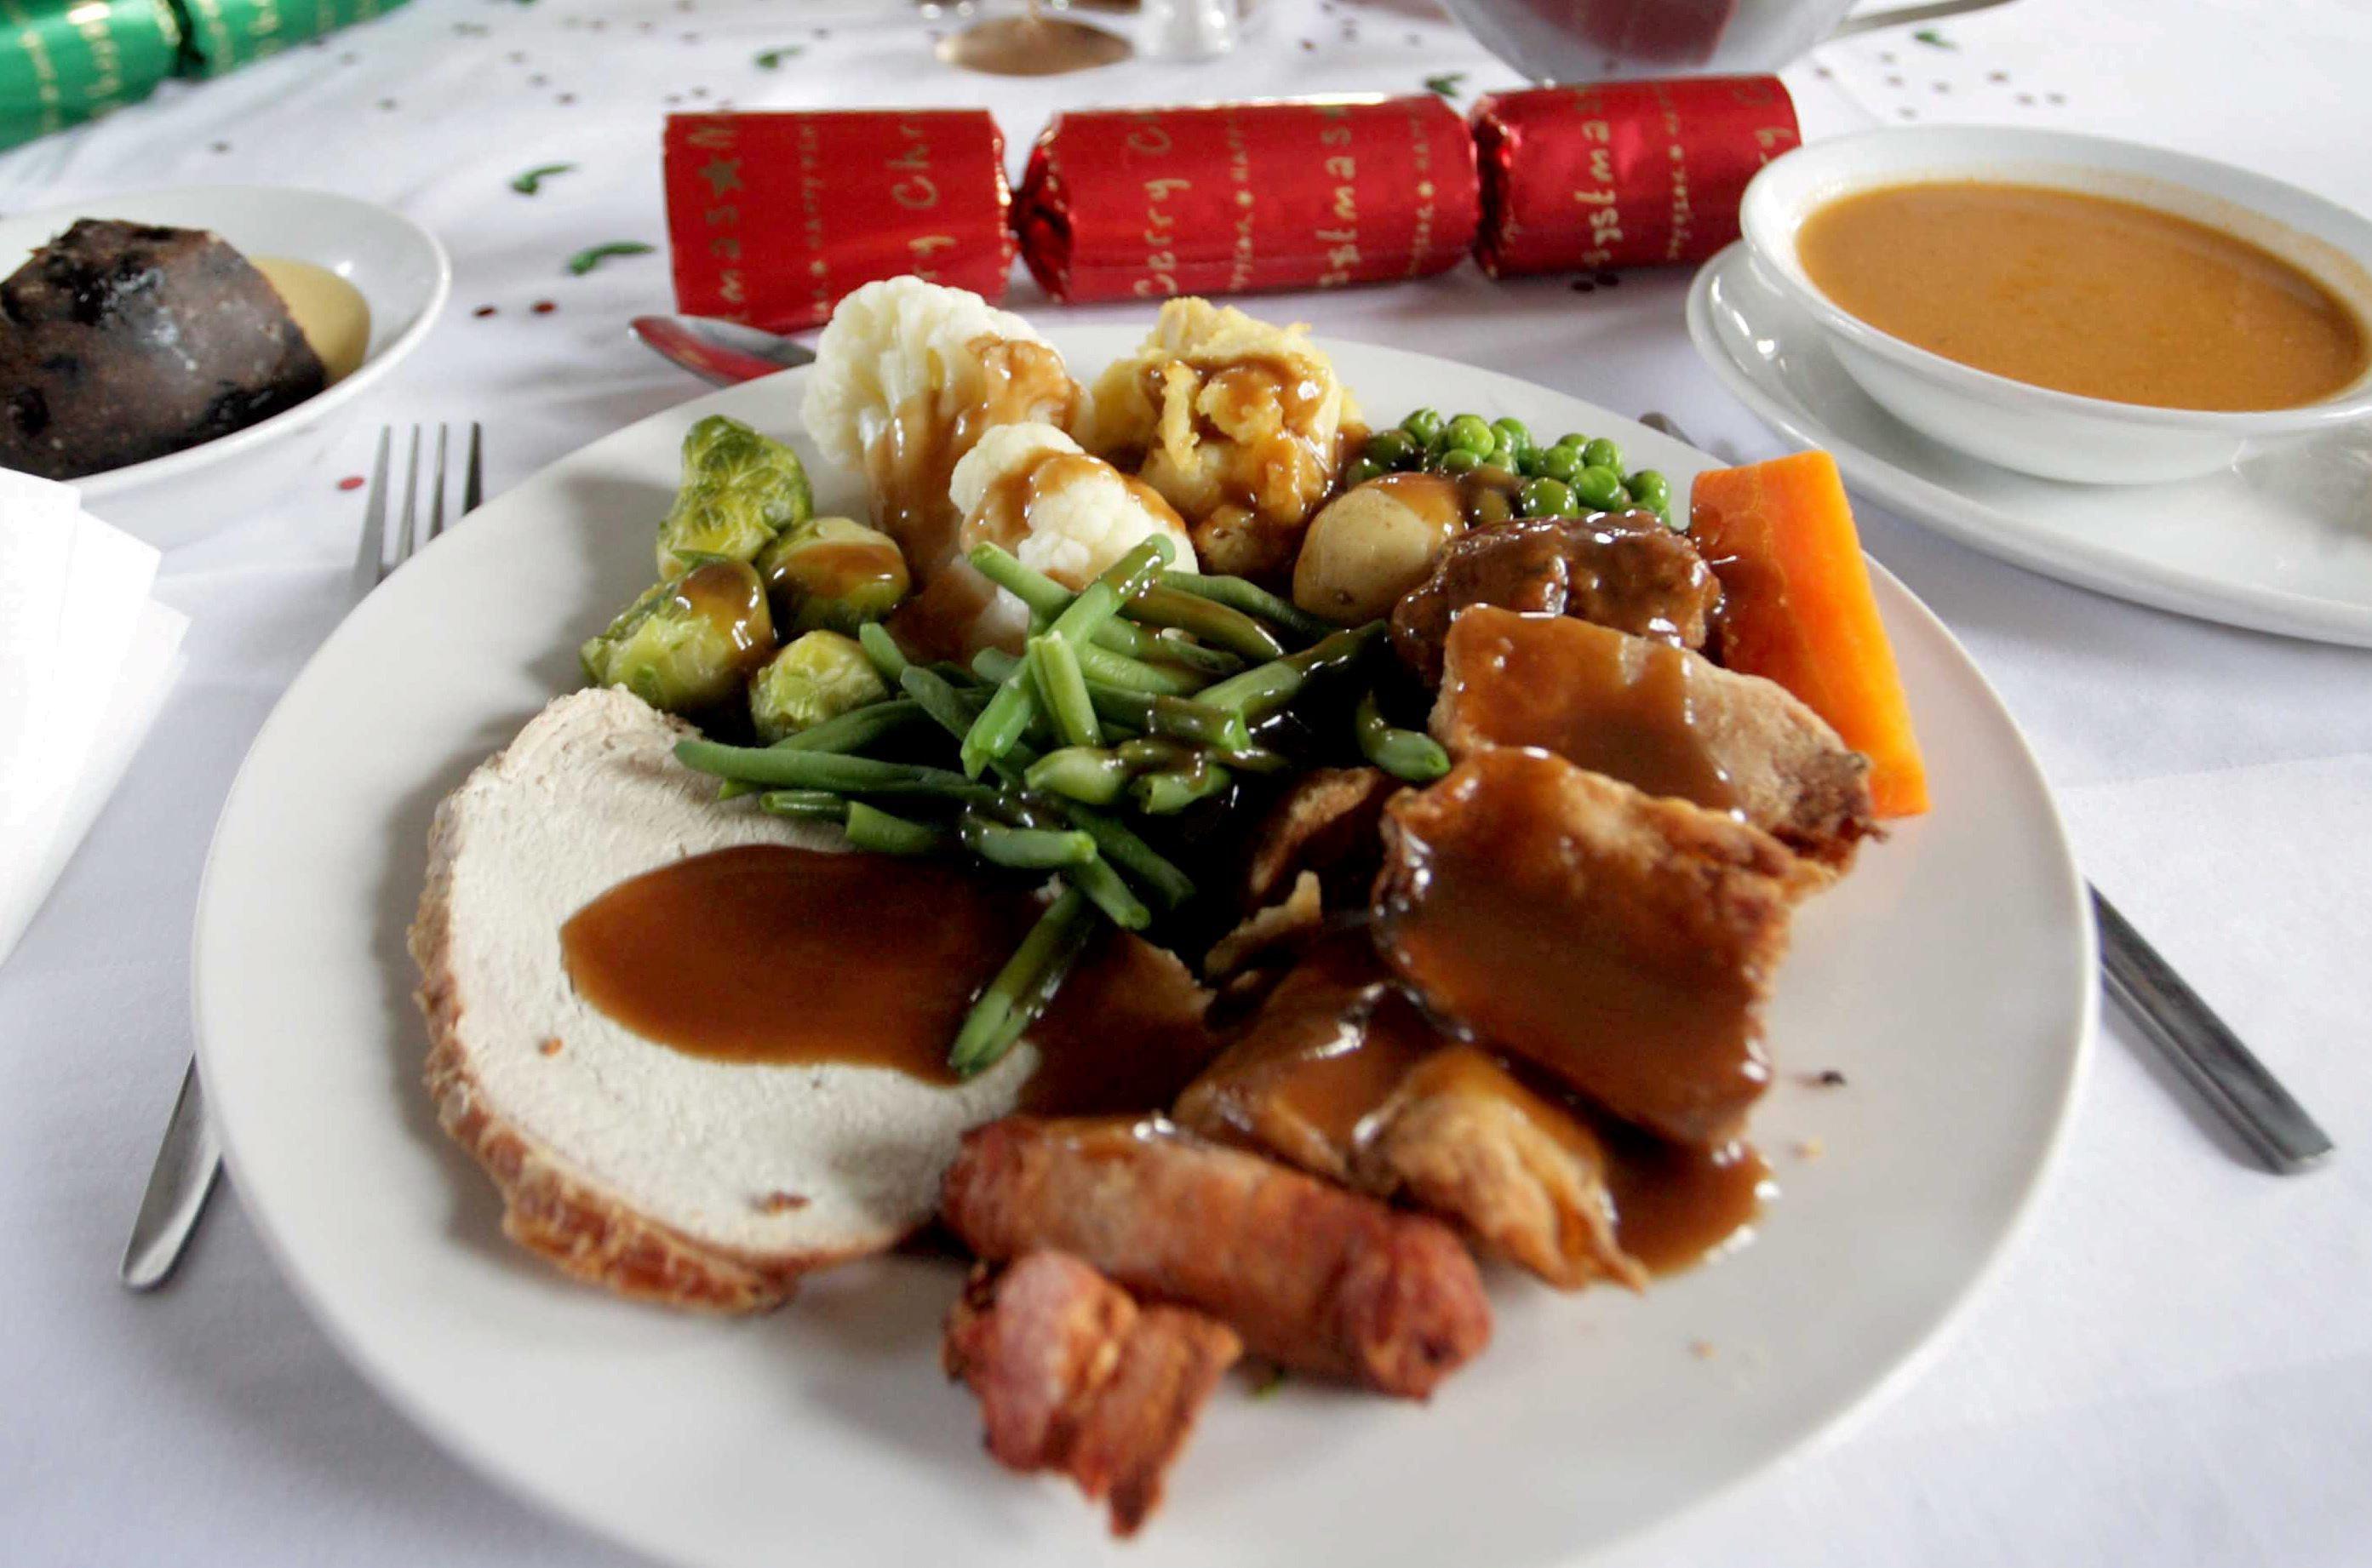  A delicious roast is one of the best parts about Christmas